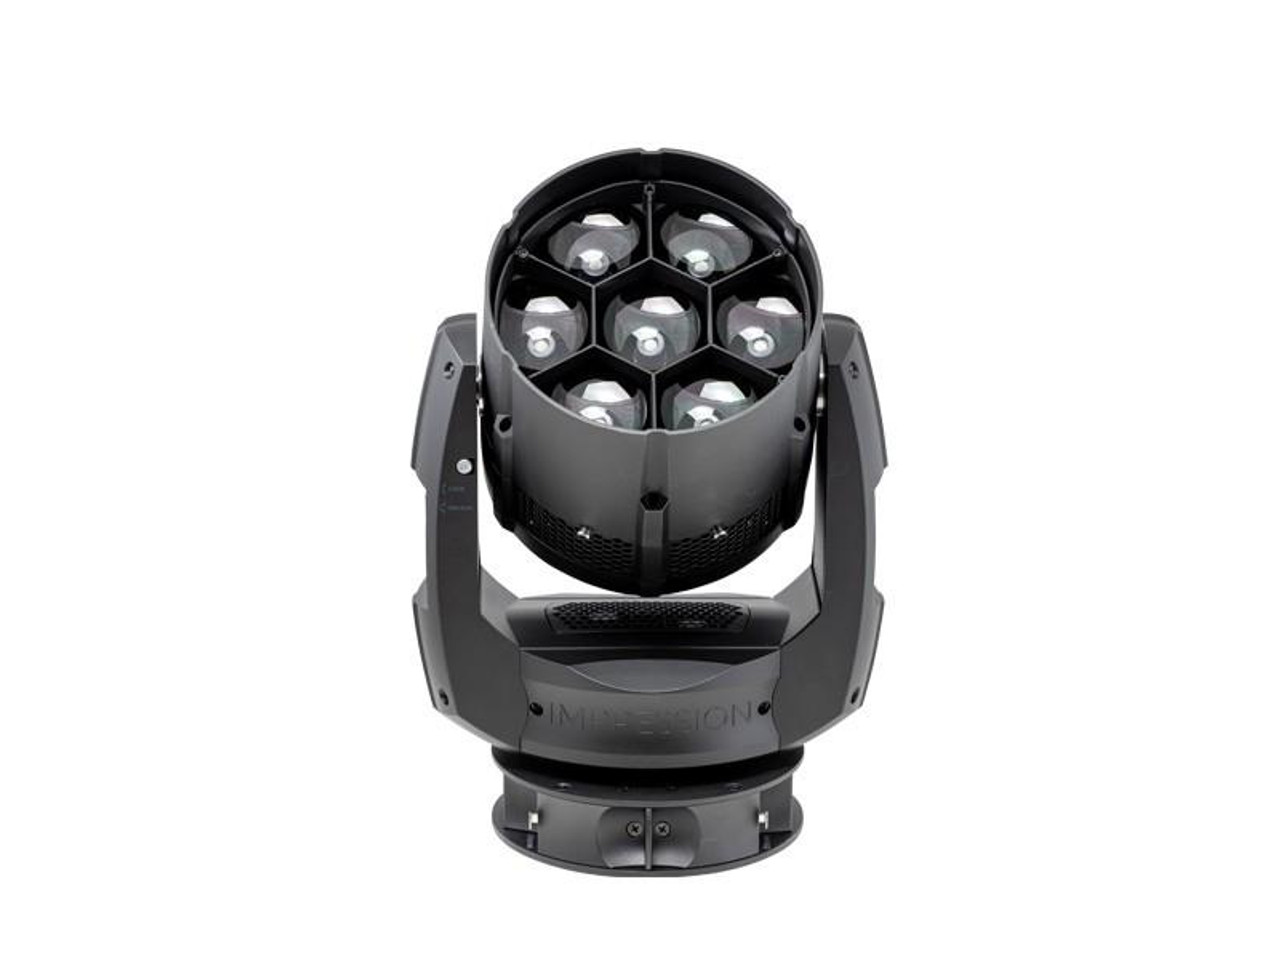 German Light Products 7794 Impression X5 Compact Moving Head Wash Light (7794) 